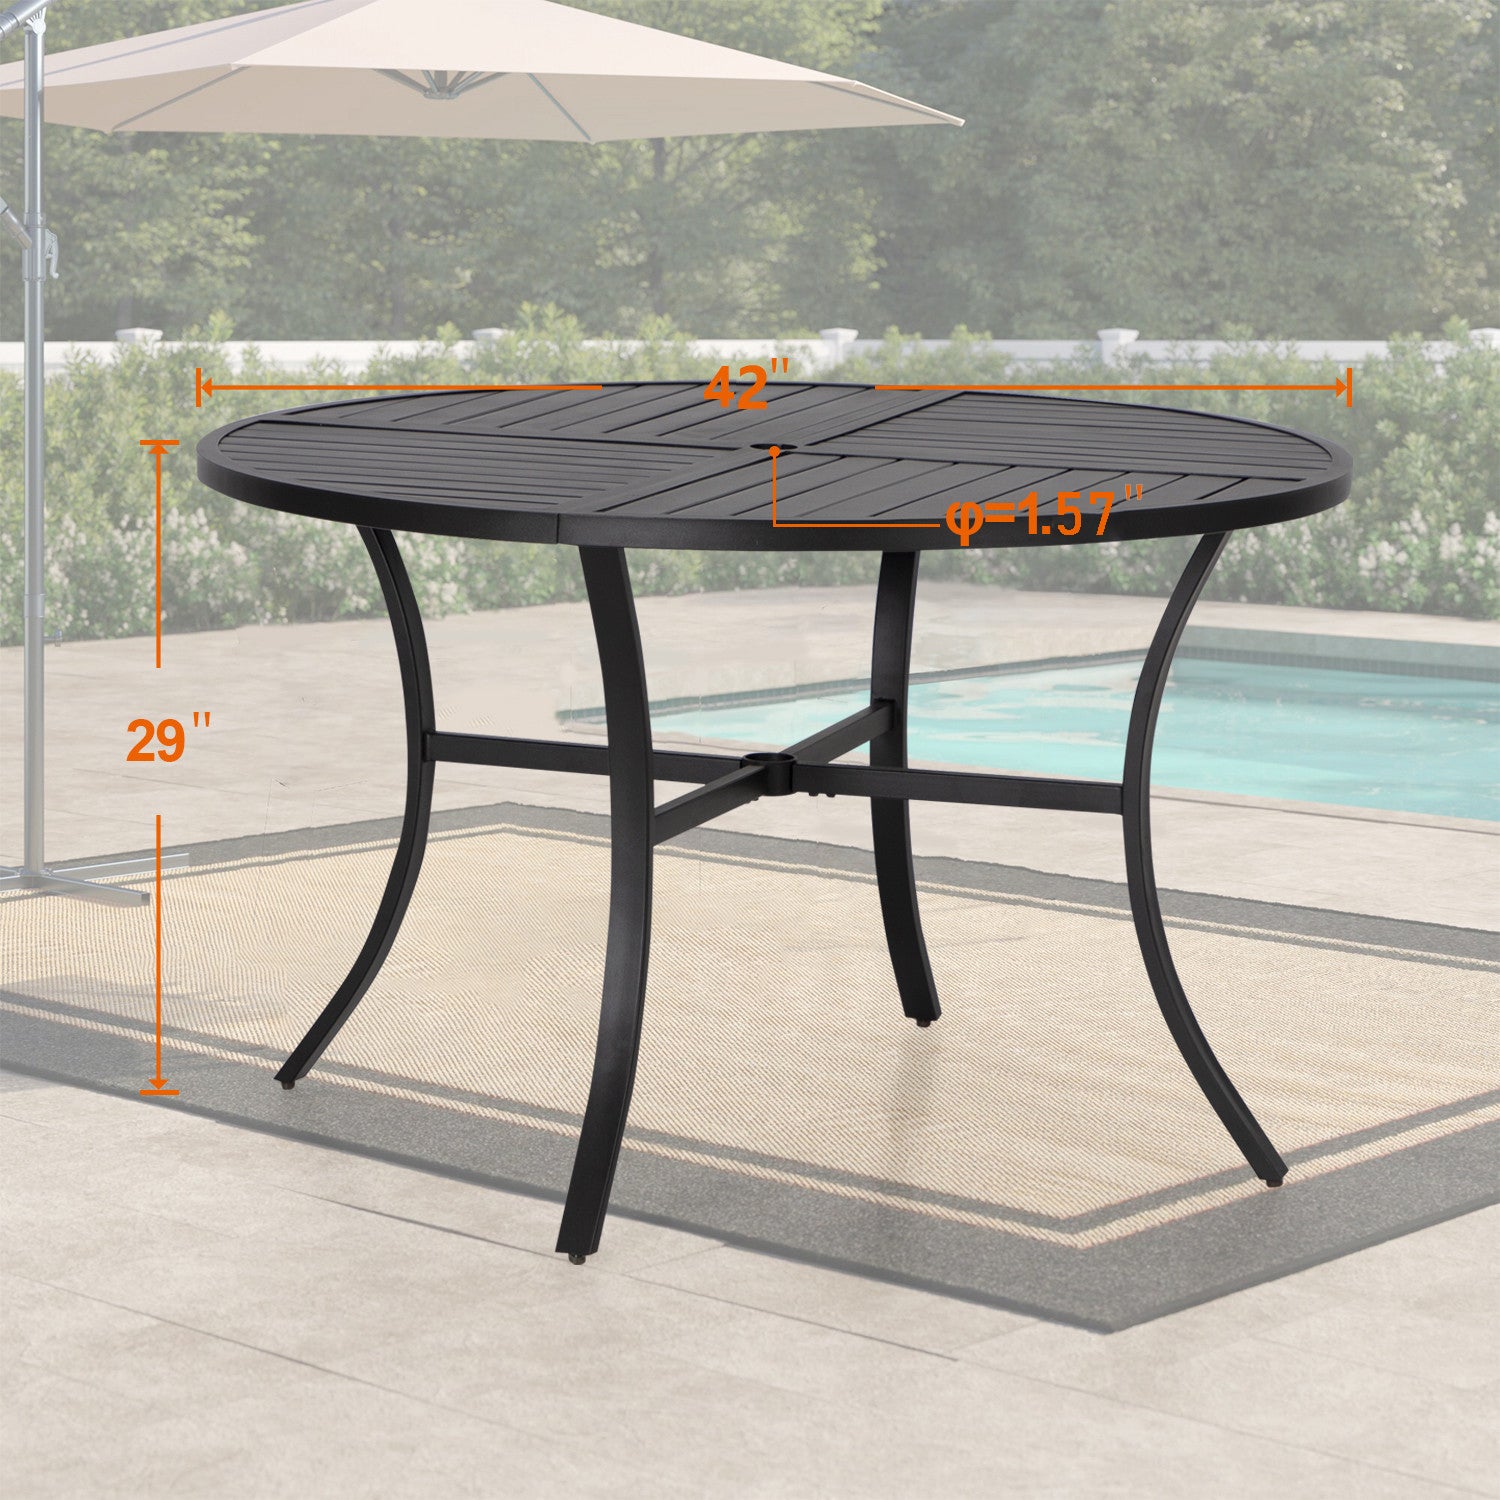 MFSTUDIO 5-Piece Patio Dining Set Textilene C-spring Chairs & Geometrically Stamped Round Table